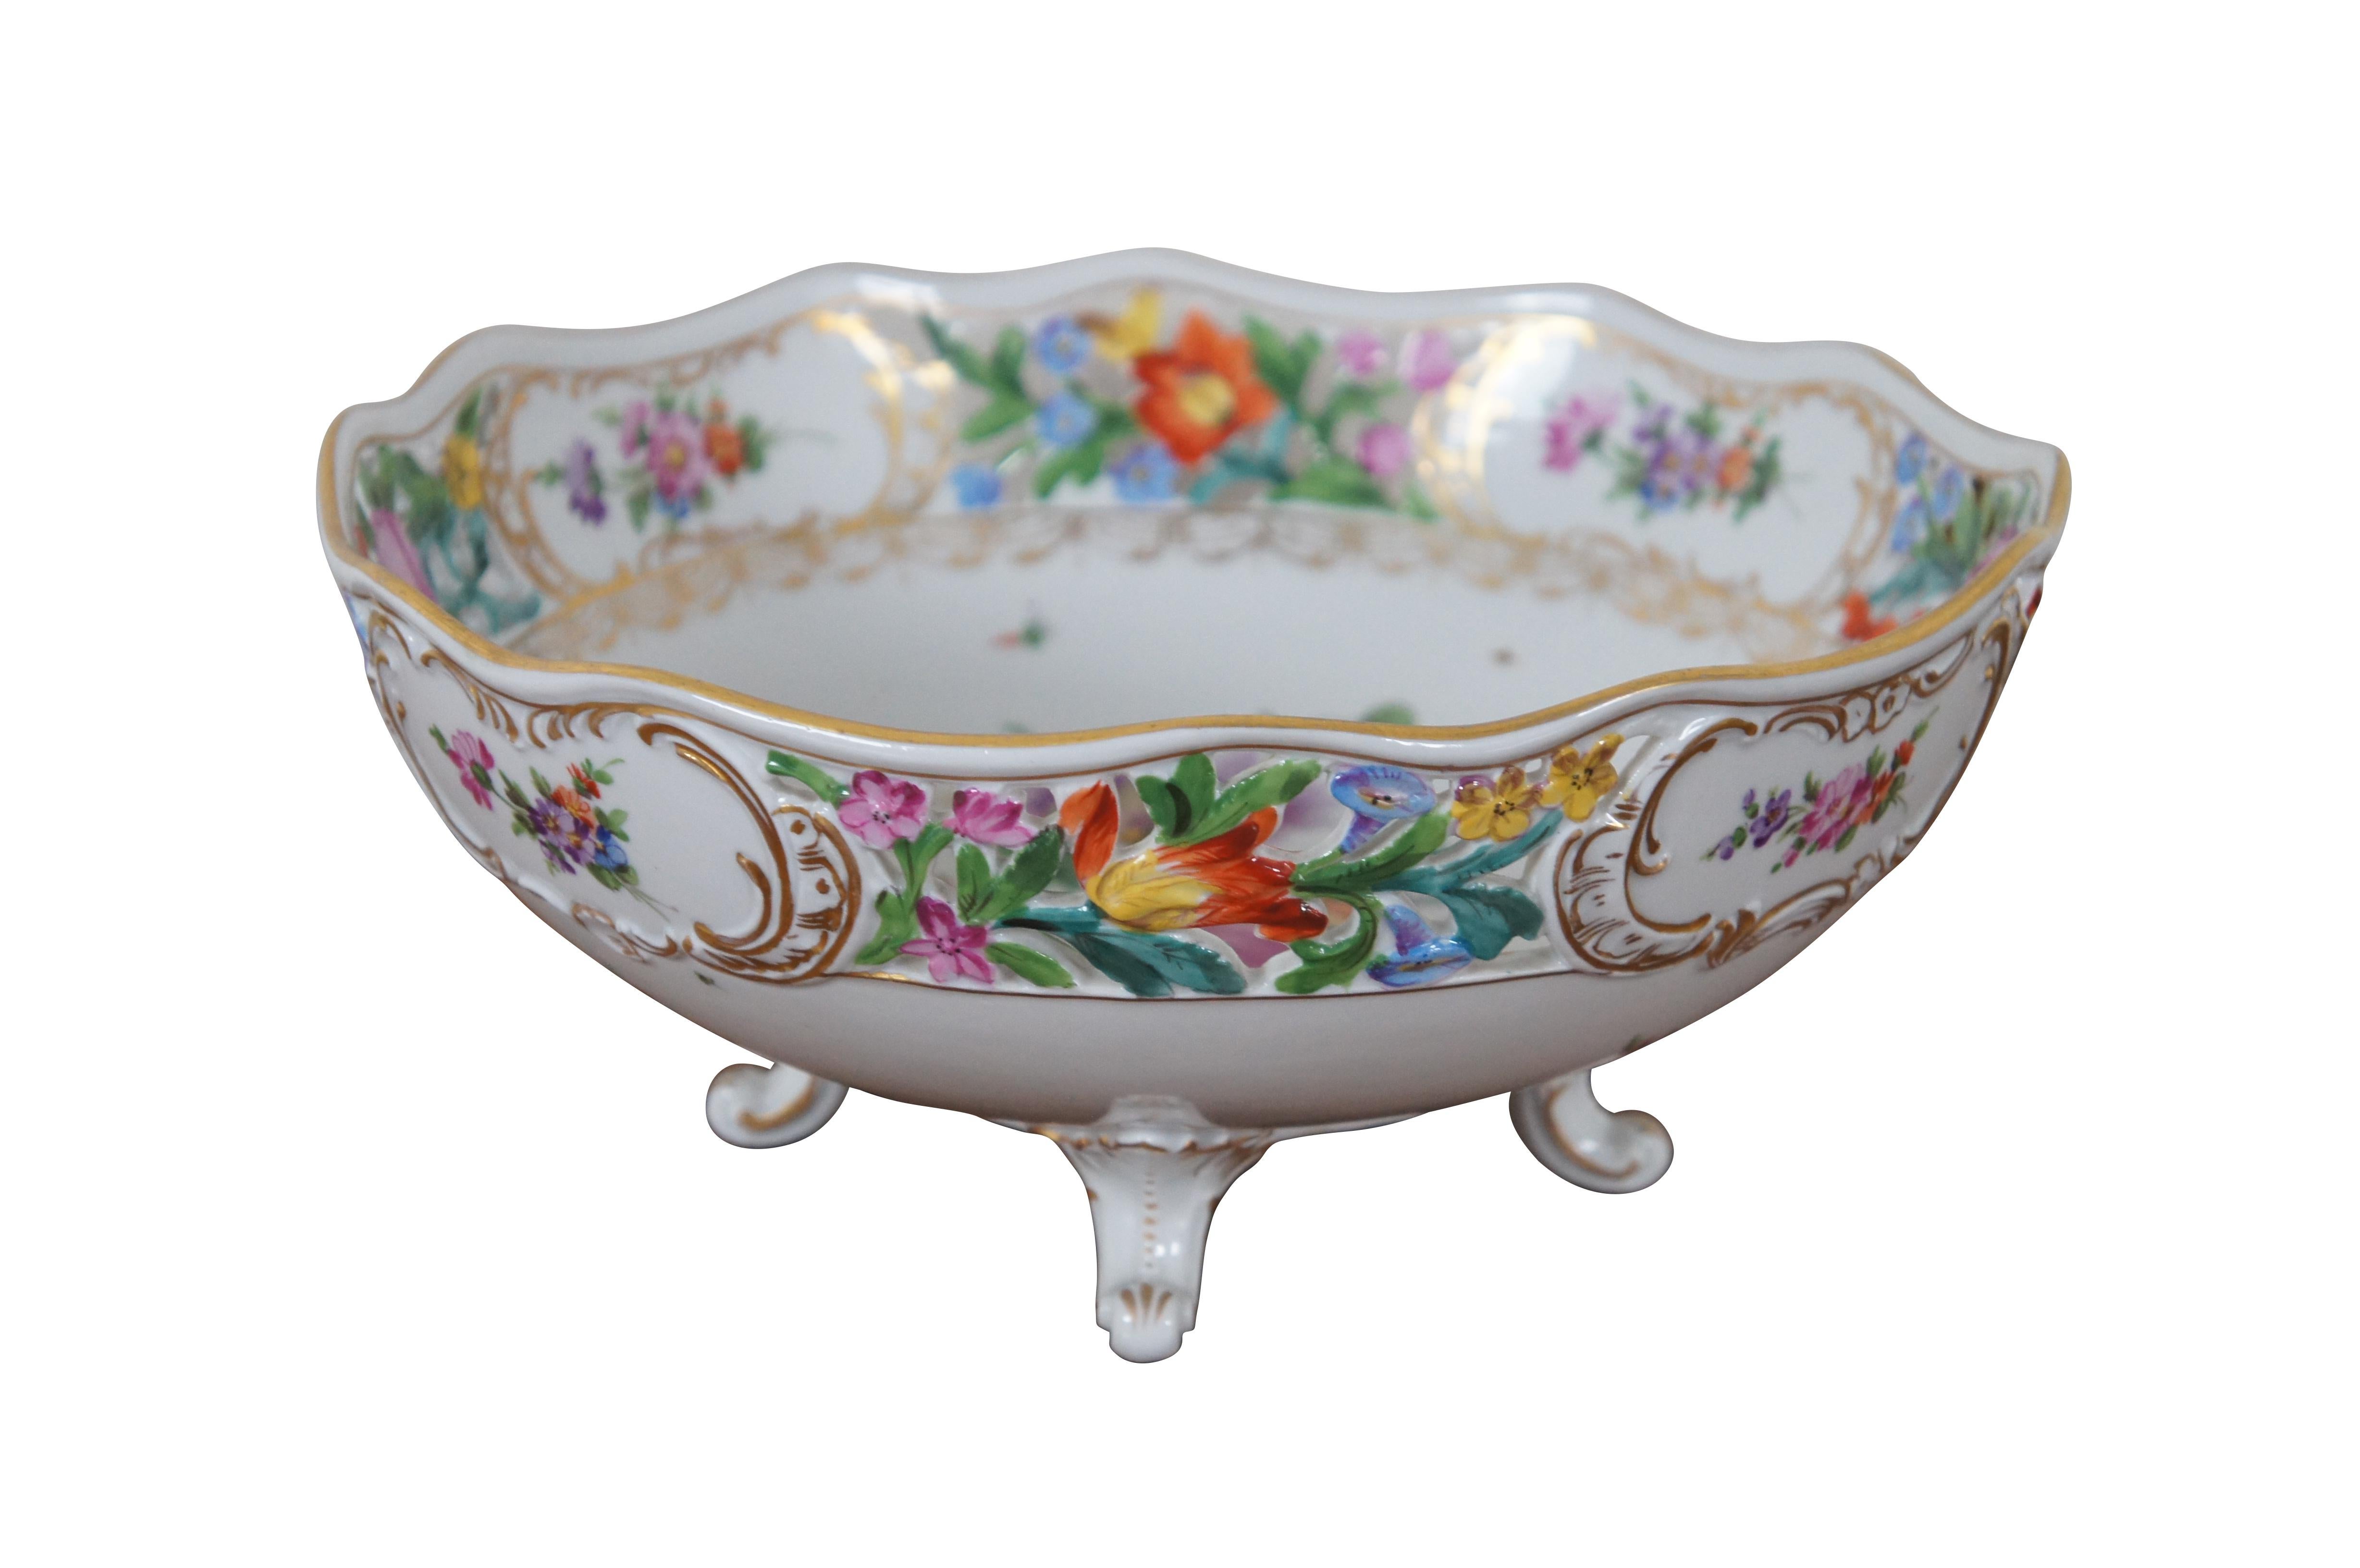 Antique Carl Thieme Dresden porcelain centerpiece bowl, basket or compote featuring round scalloped form with reticulated floral design and footed base.

“The Sächsische Porzellan-Manufaktur Dresden GmbH (Saxon Porcelain Manufactory in Dresden Ltd),